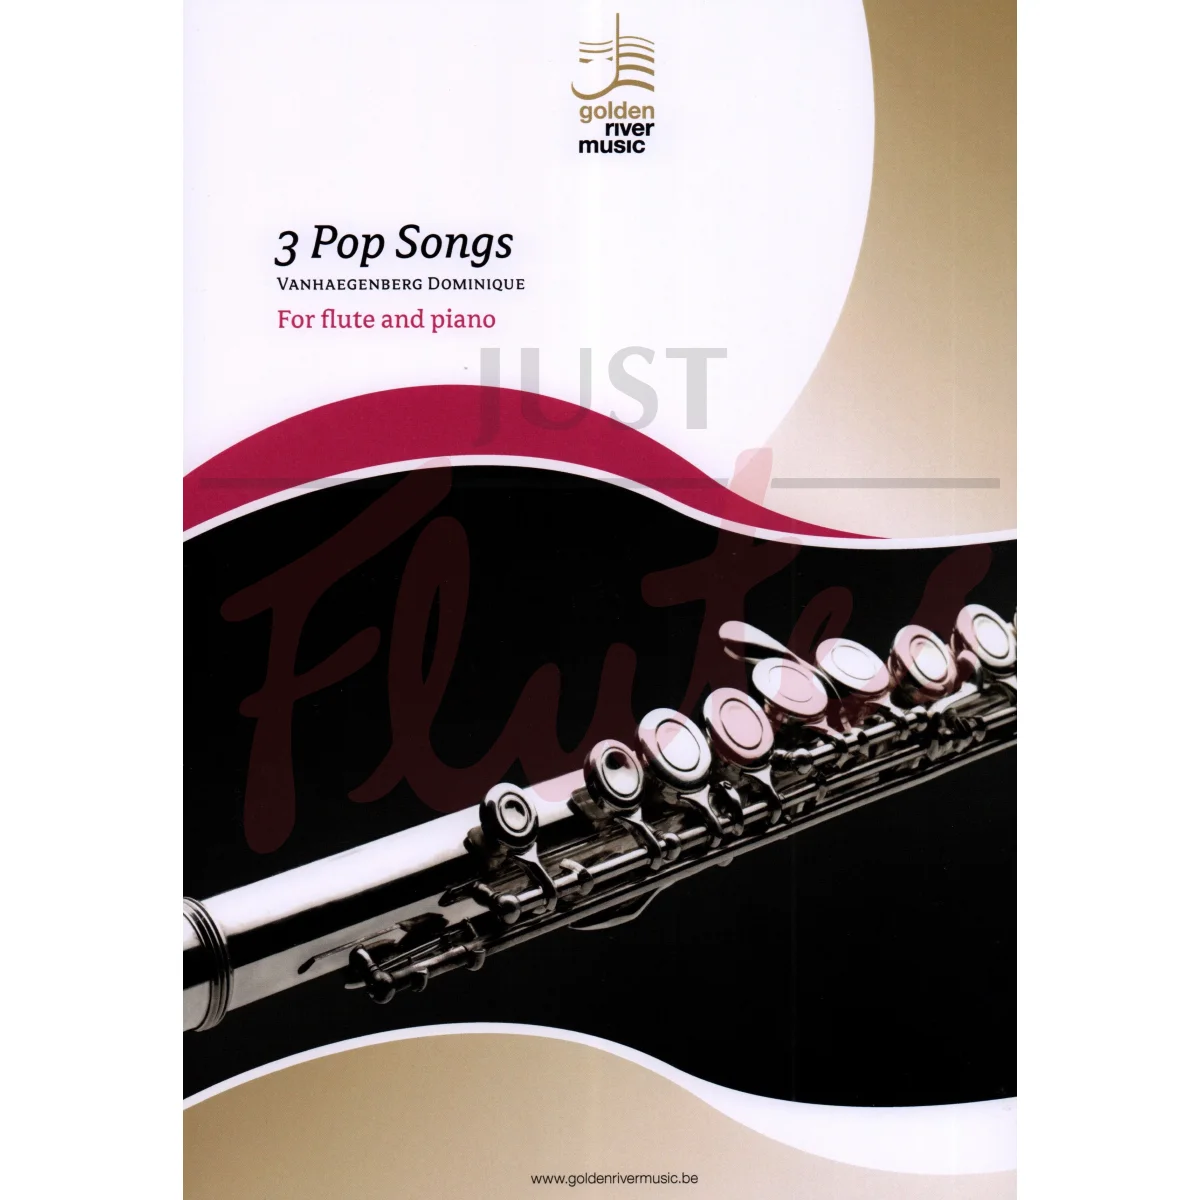 3 Pop Songs for Flute and Piano